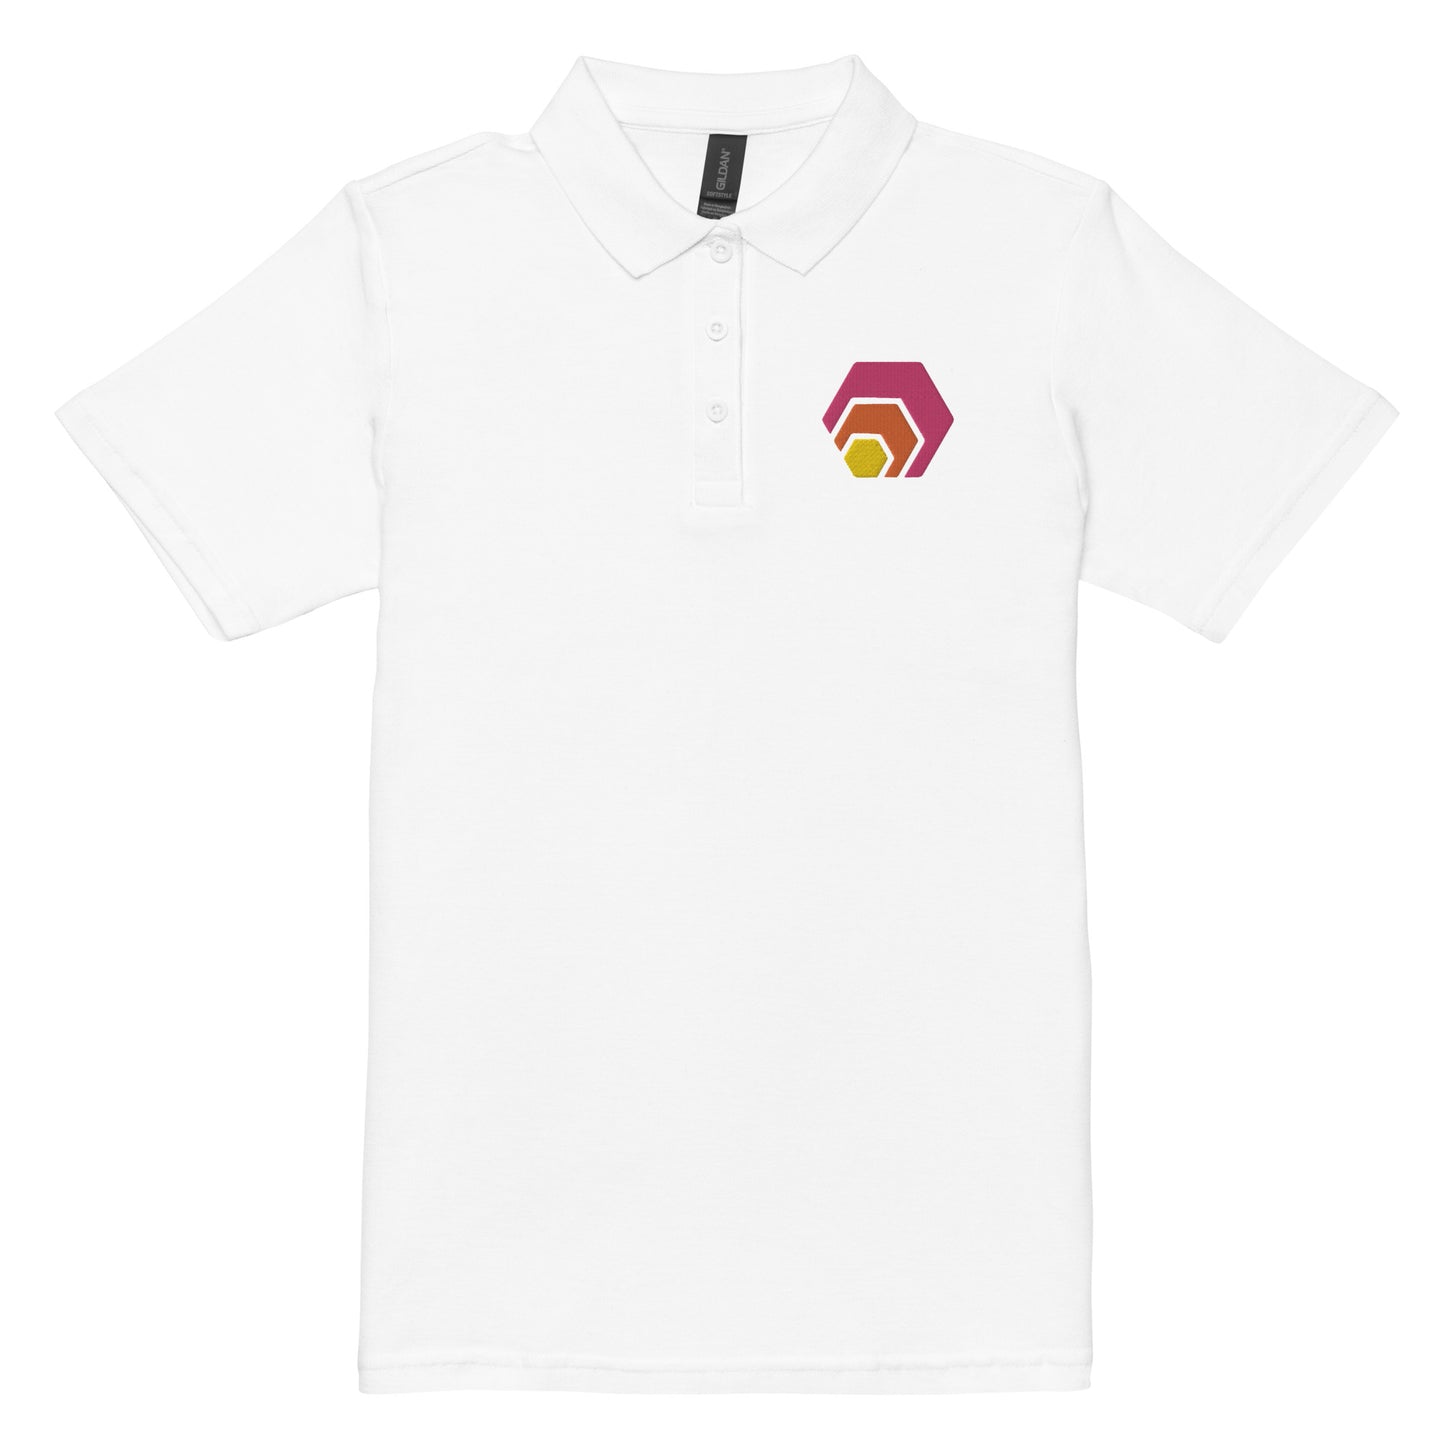 HEX Women’s Pique Polo Shirt (Embroidered)